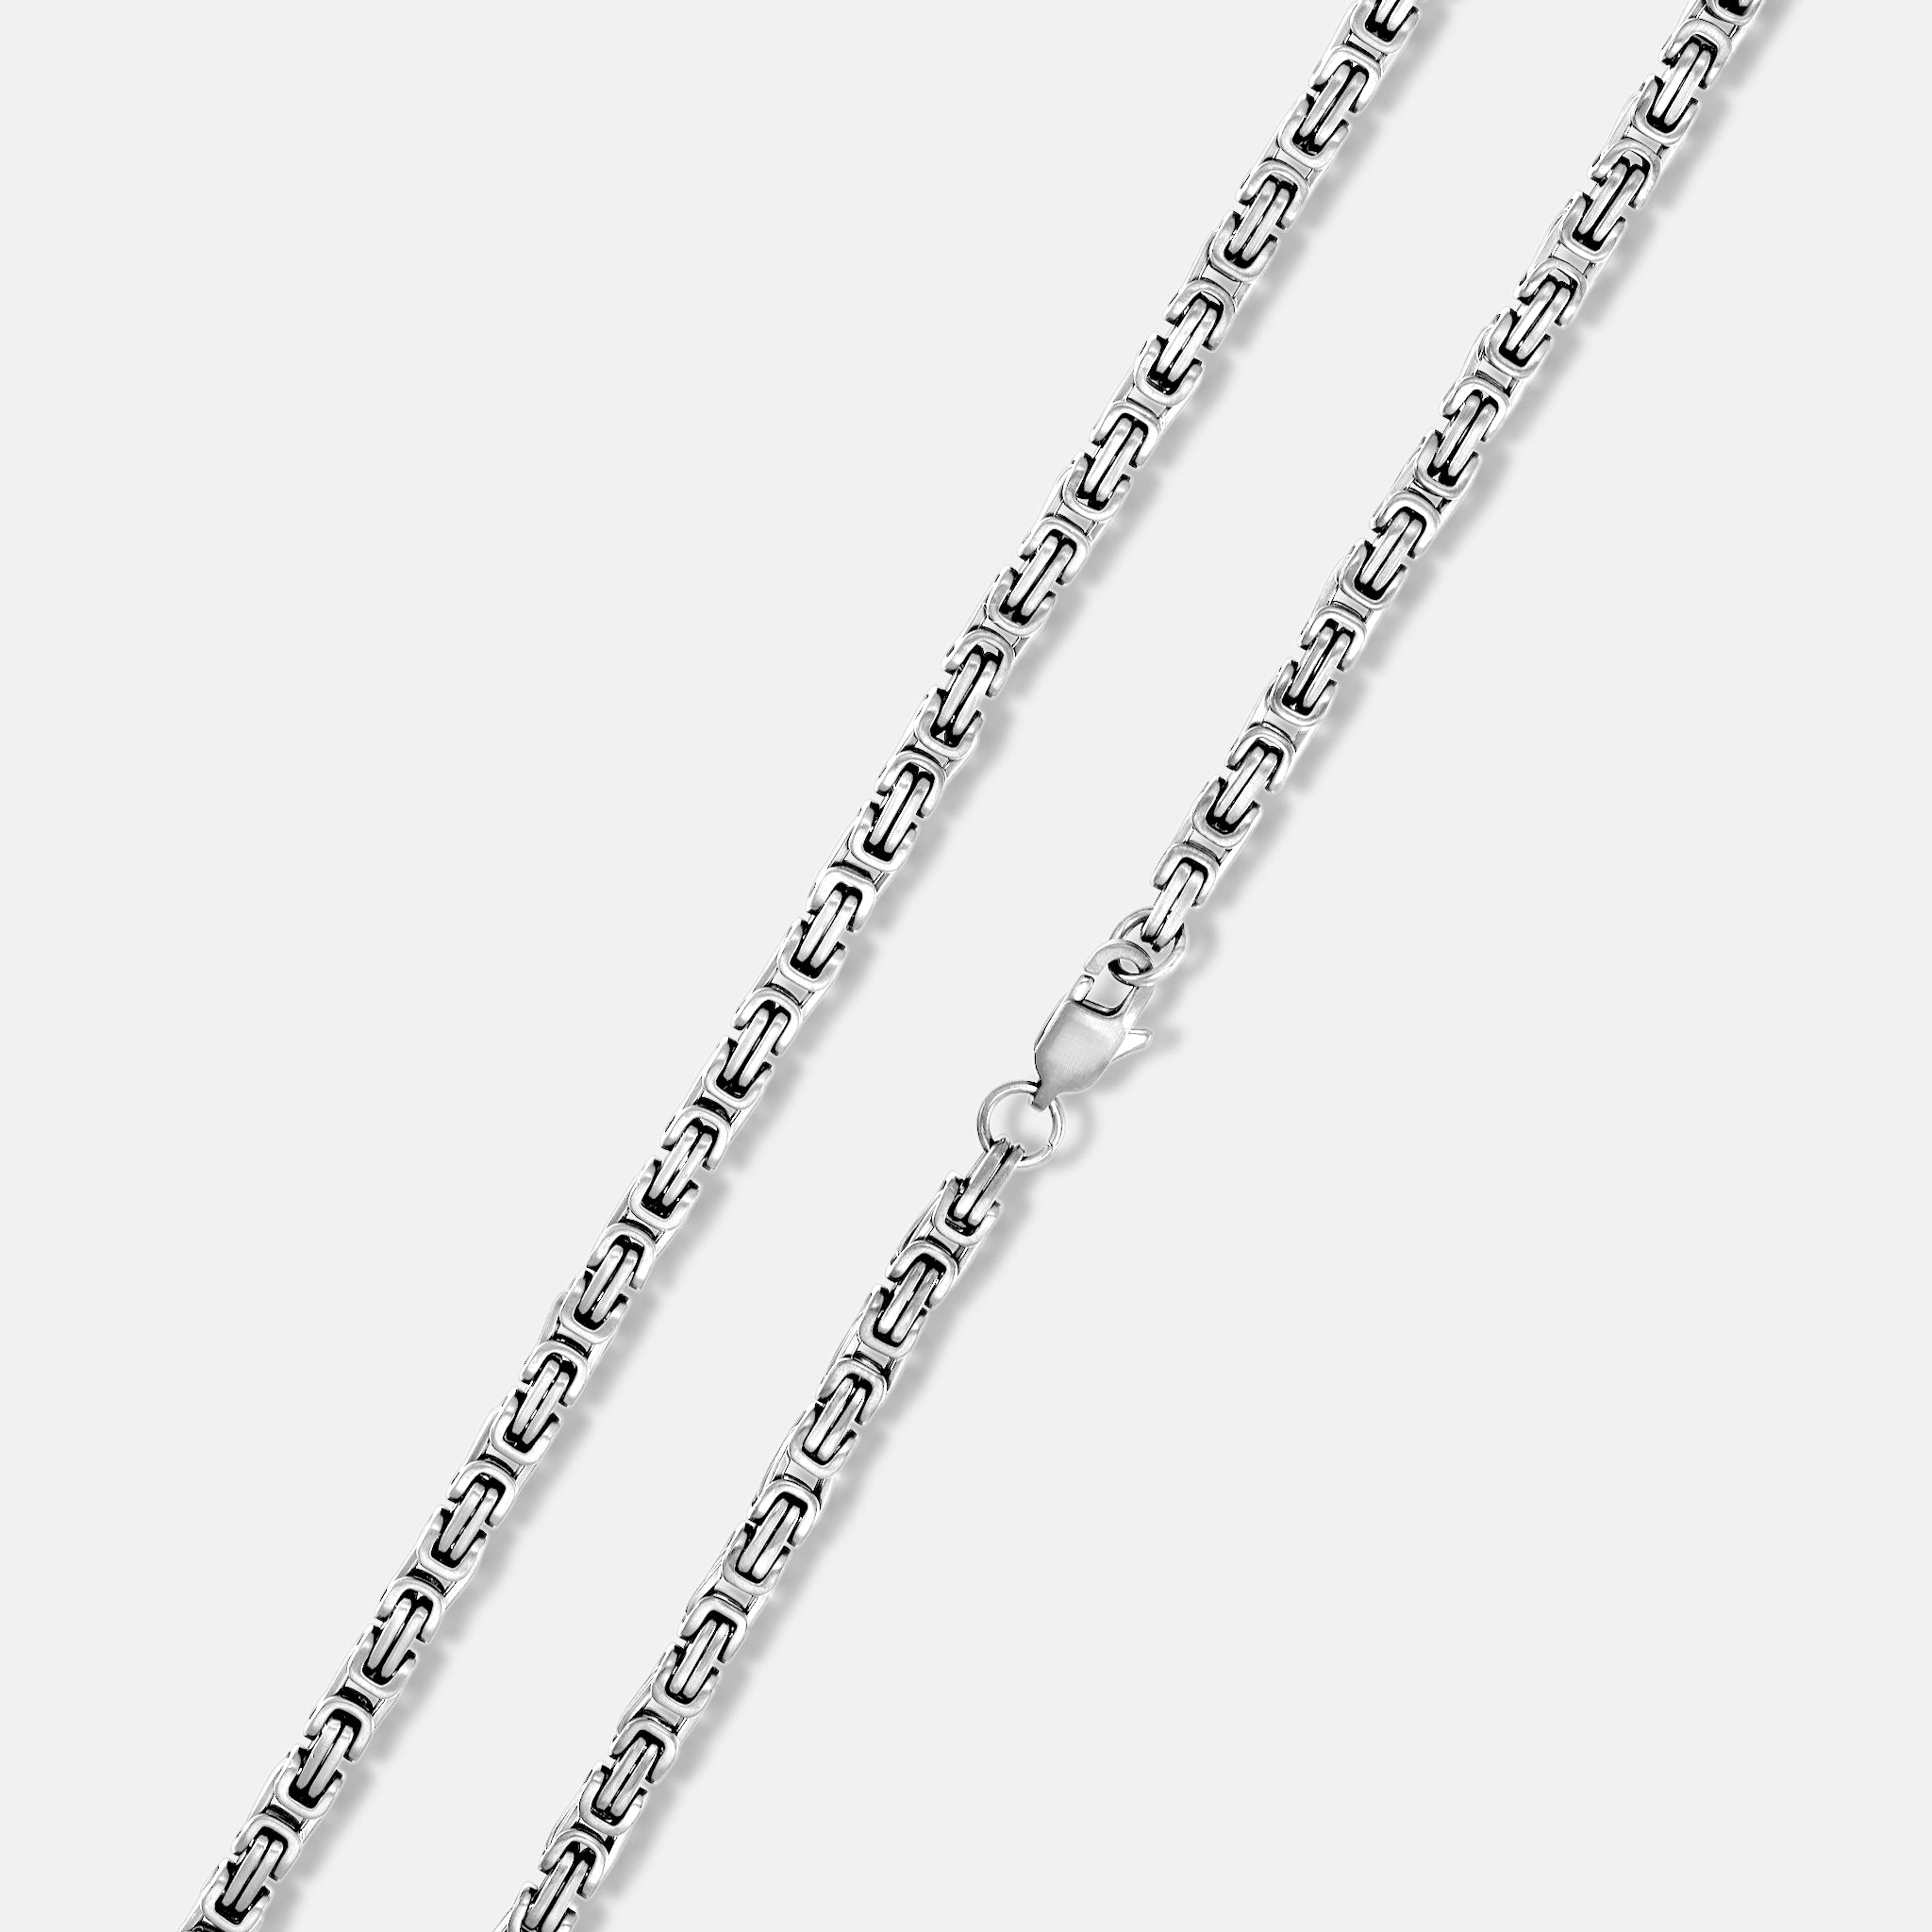 K12 - SILVER KING CHAIN - 4.2MM